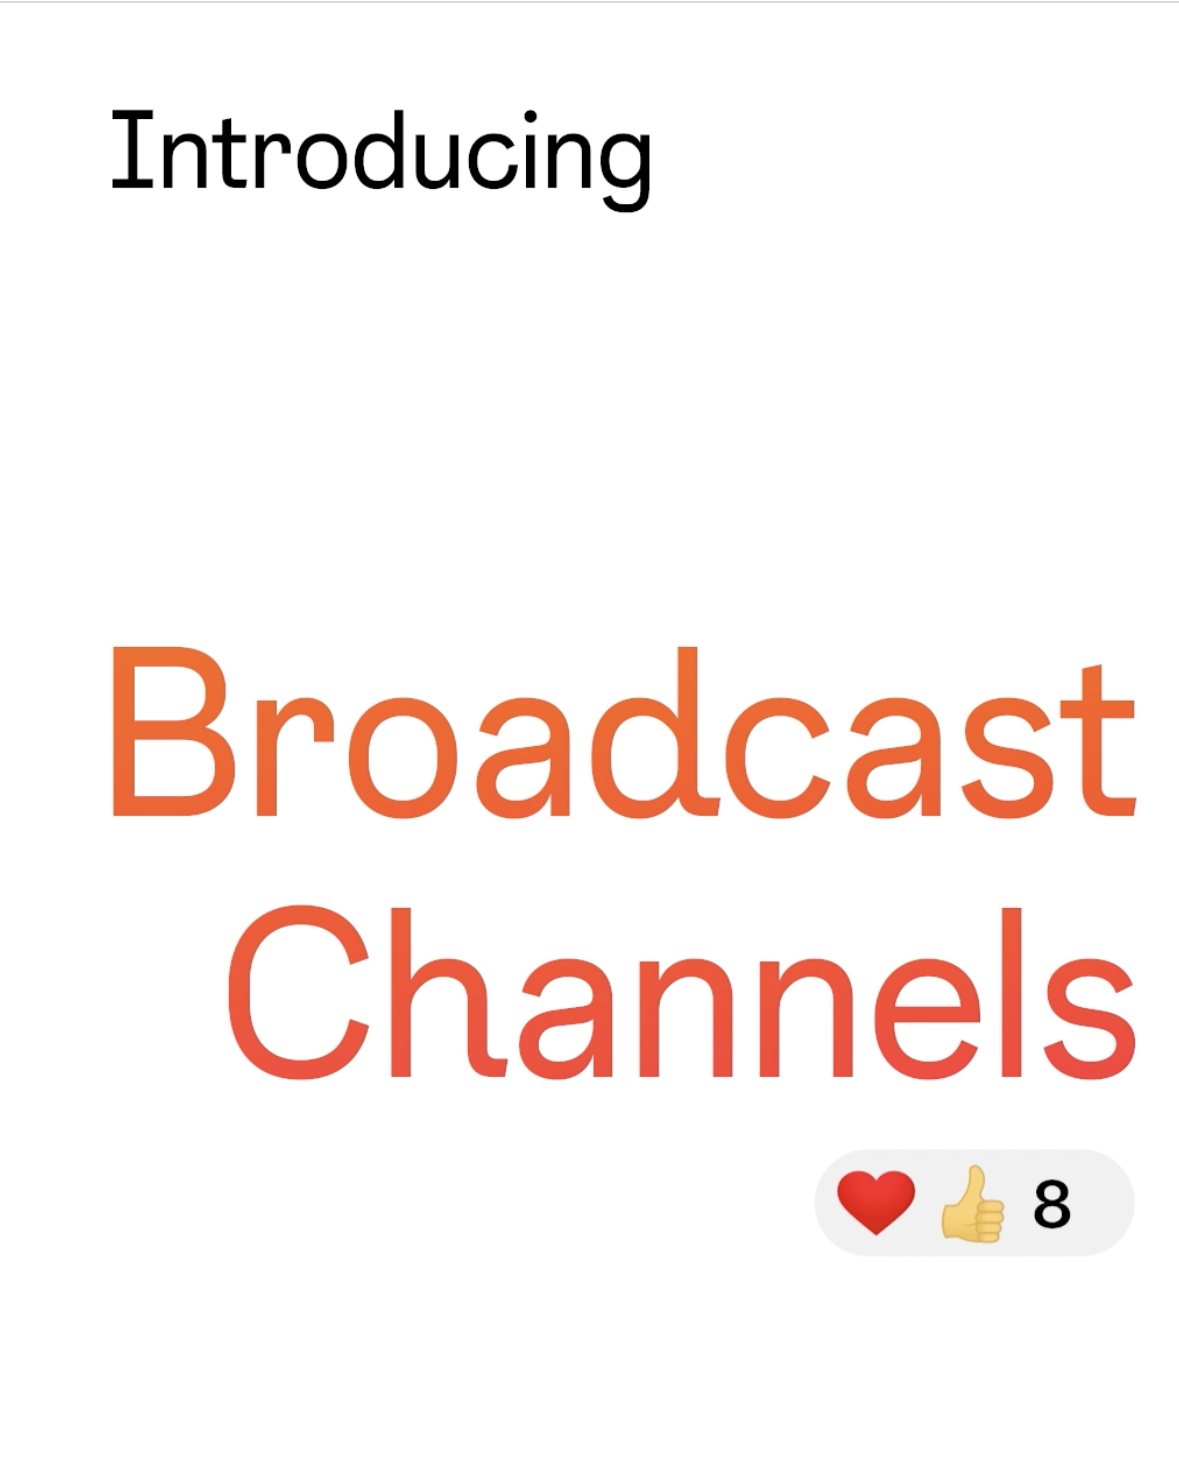 Stories in Channels, View-Once Media and More